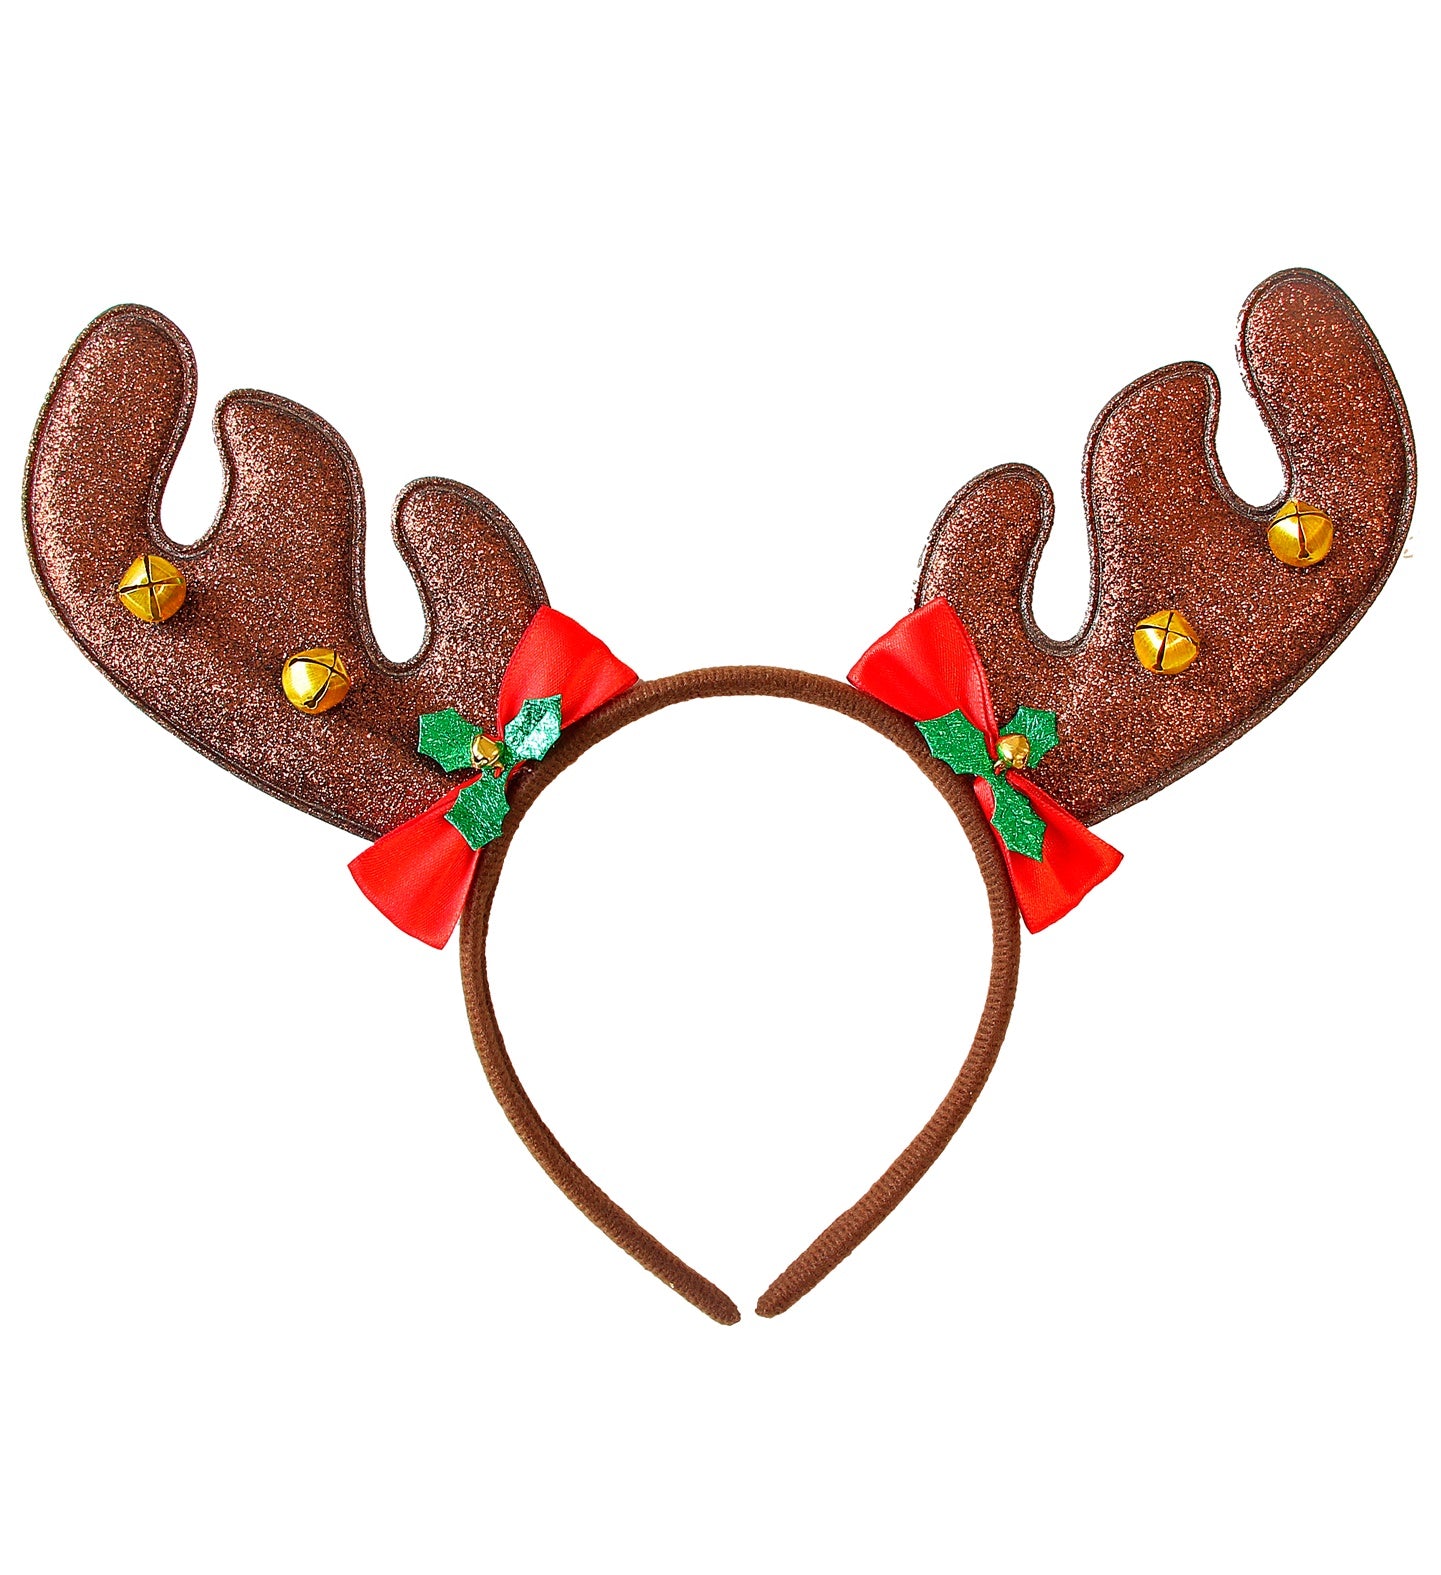 Reindeer Antlers With Red Bows and Jingle Bells